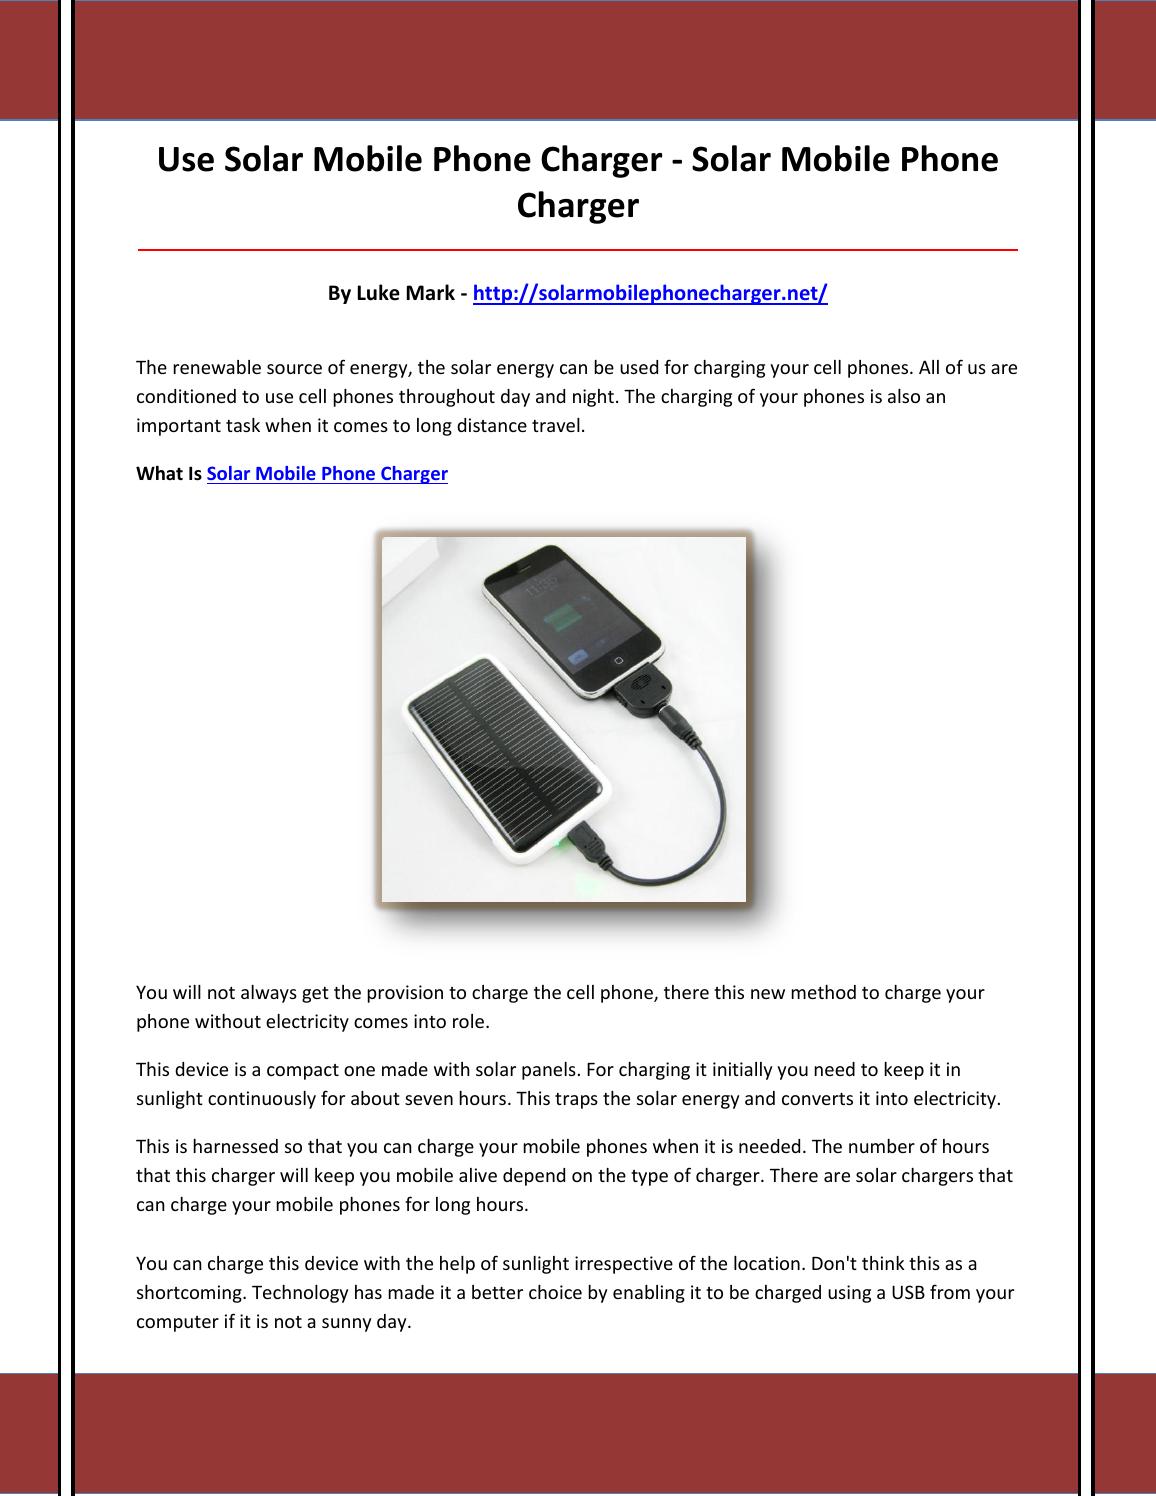 Charge Your Cell Phone Without Electricity